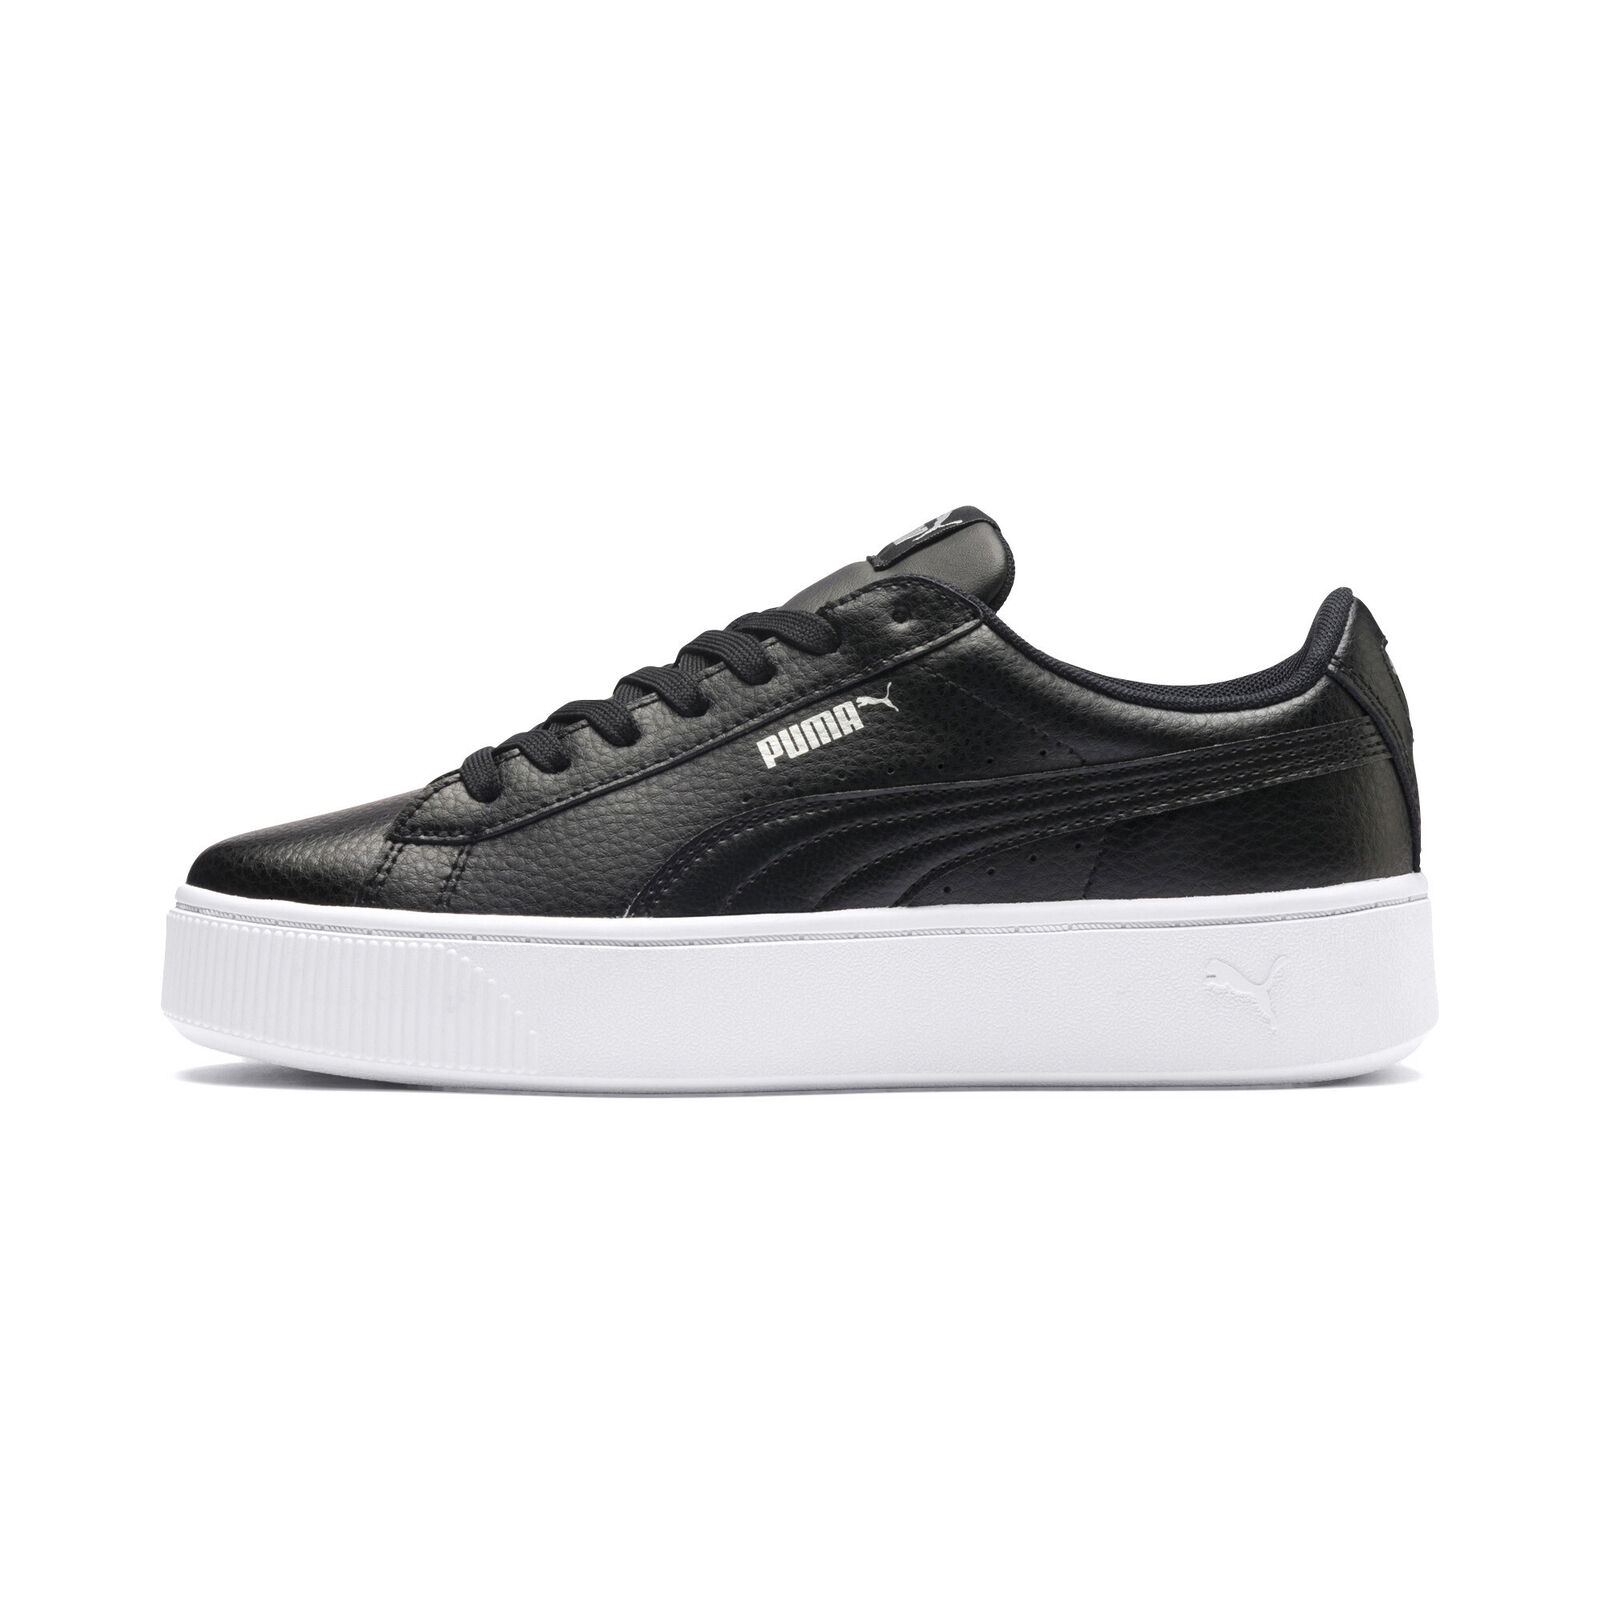 PUMA Women's Vikky Stacked Sneakers